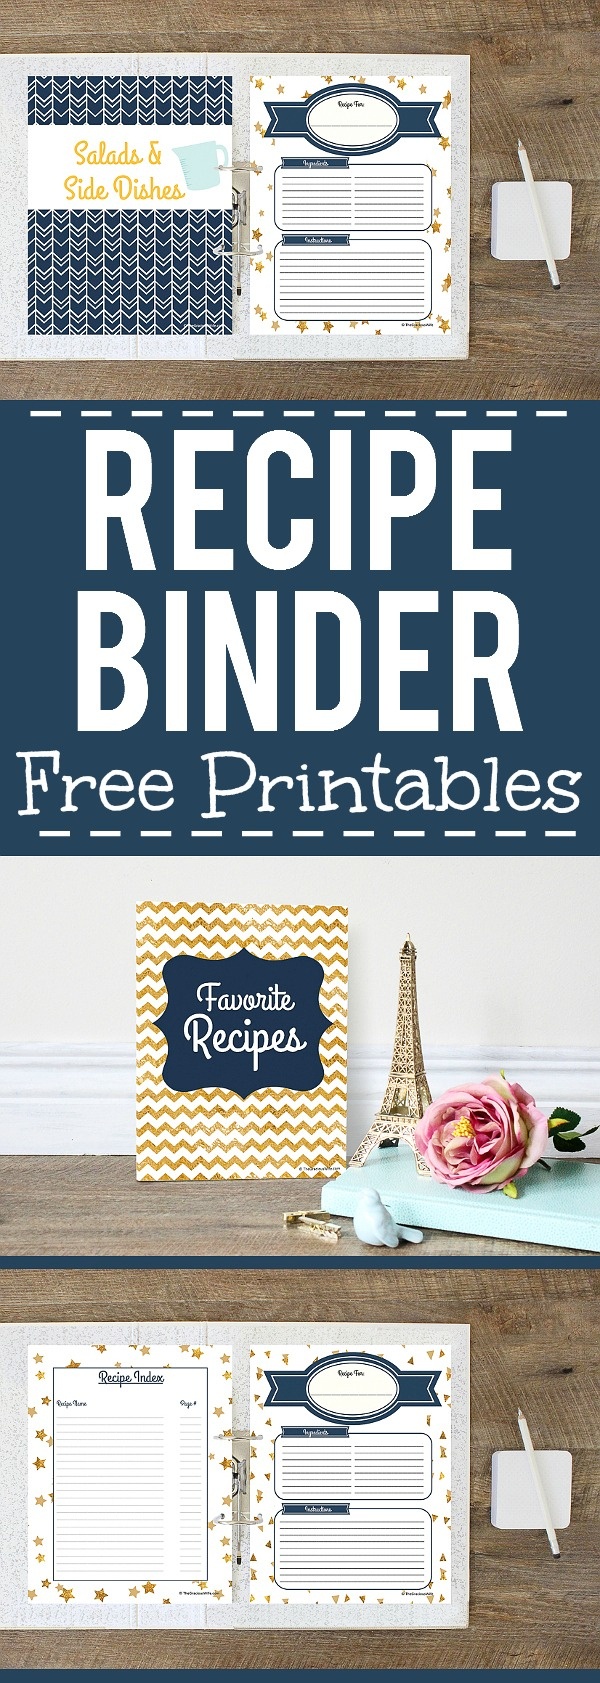 How To Make A Recipe Binder | Free Recipe Binder Printables - Create Your Own Free Printable Cookbook